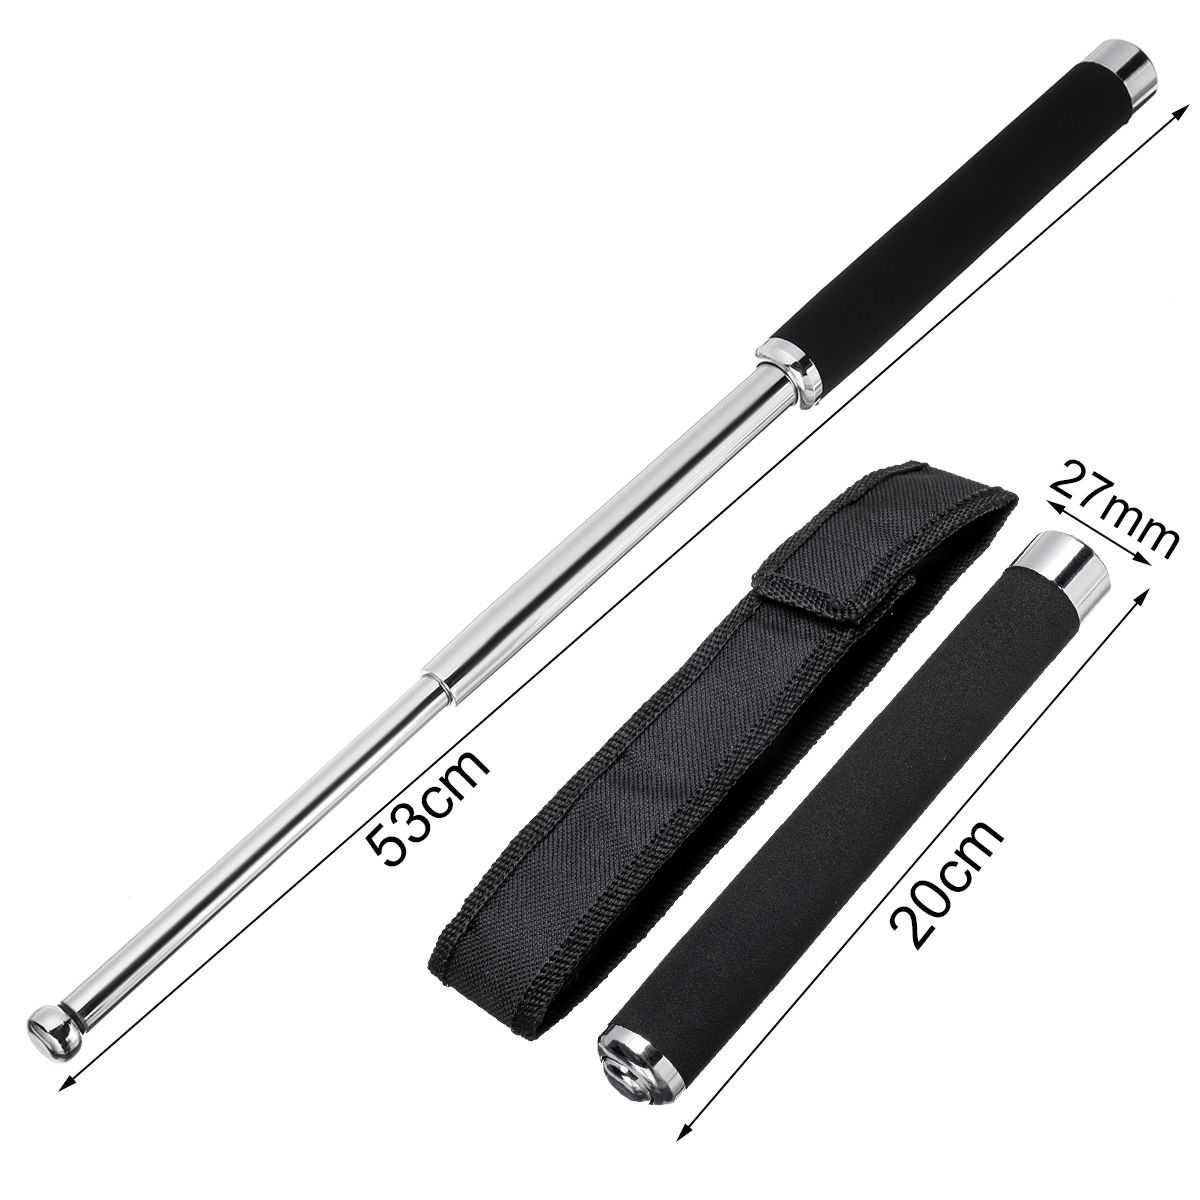 Tactical-Pen-Guard-Protection-Telescopic-Emergency-Survival-Tool-Gift-Window-Breaking-1288354